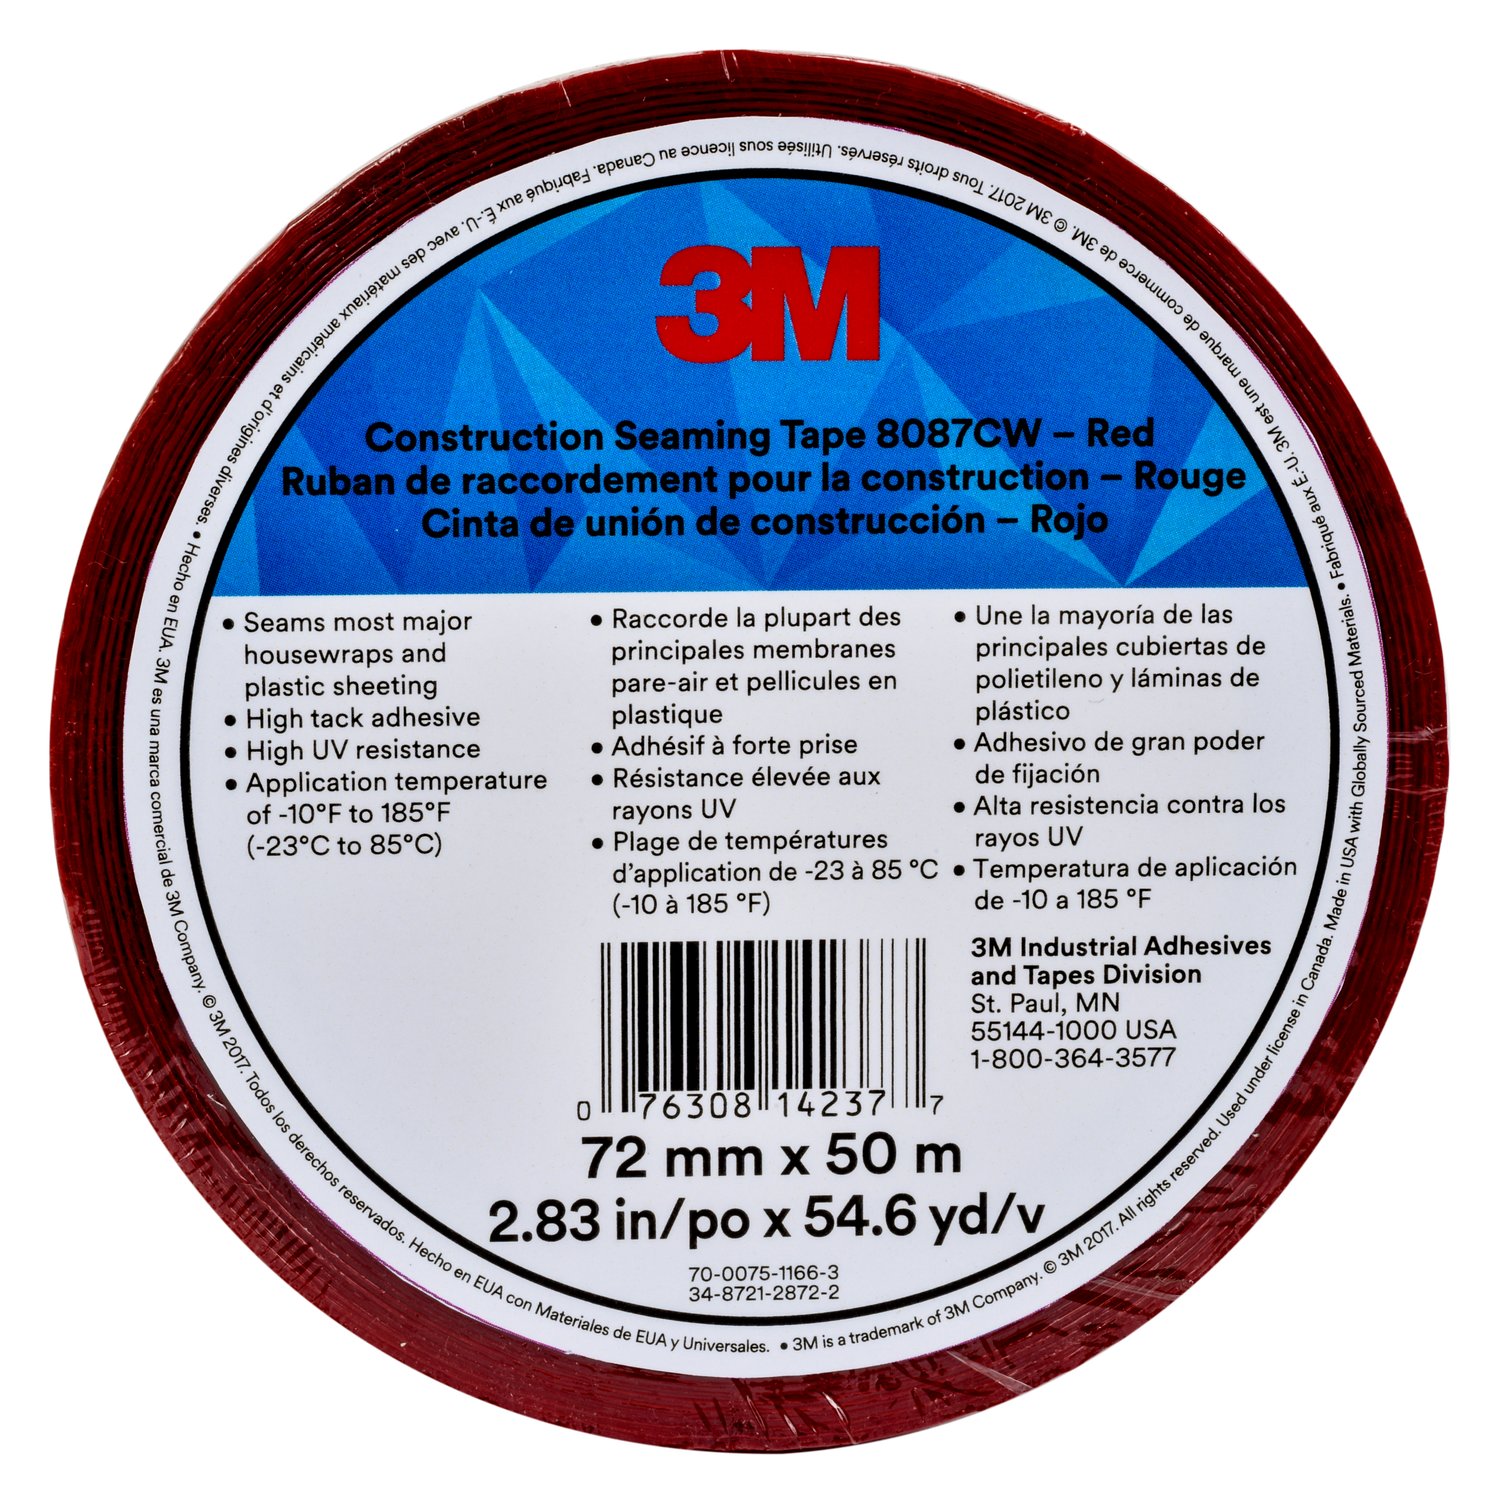 7010291680 - 3M Construction Seaming Tape 8087CW, Red, 99 mm x 50 m, 12 rolls per
case